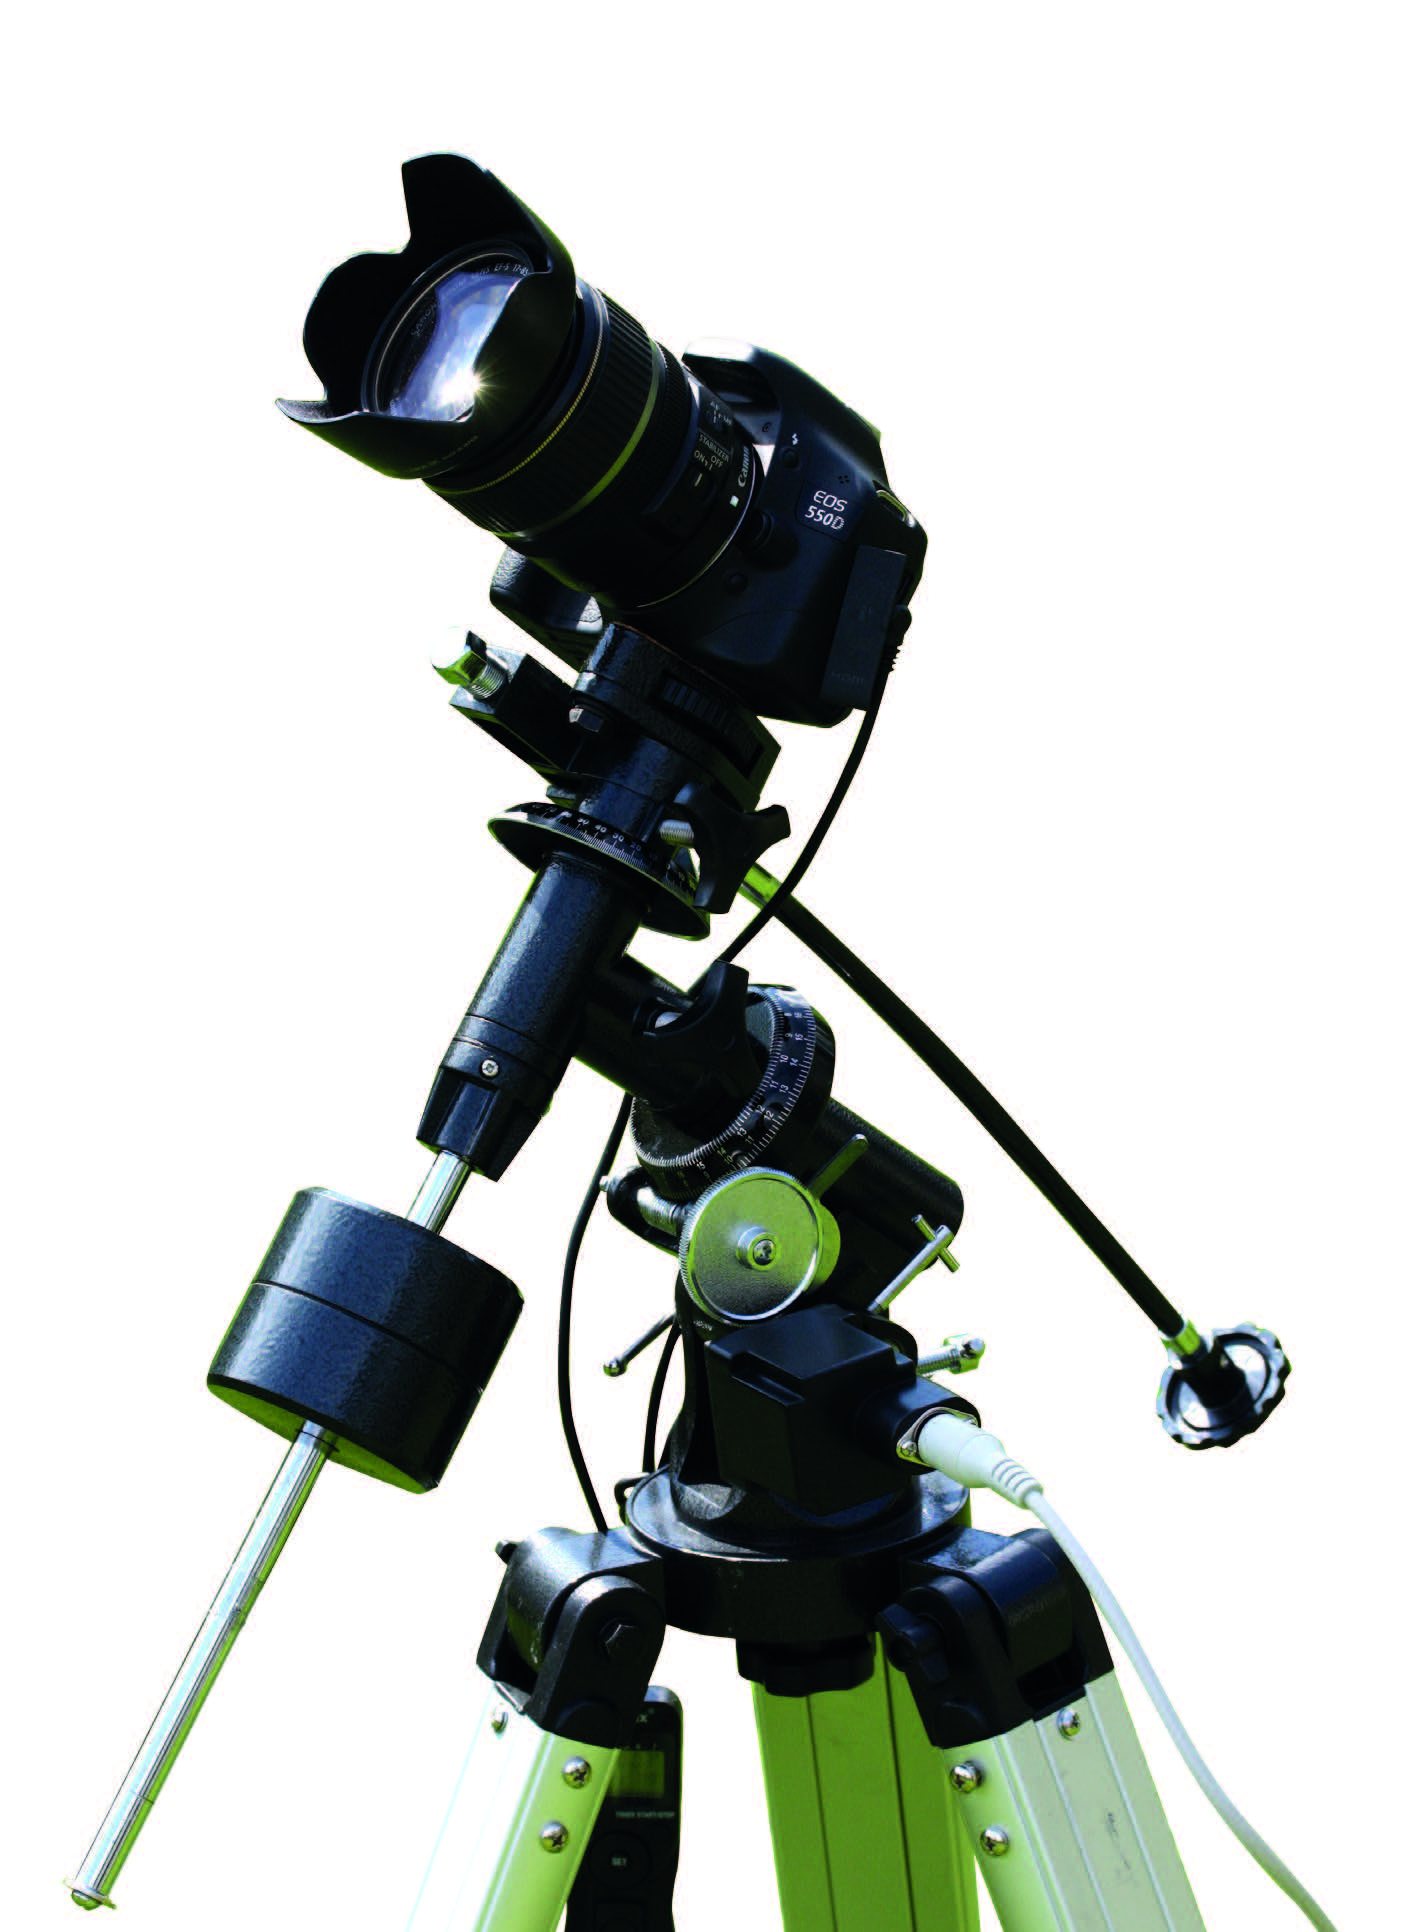 An affordable EQ-2 equatorial mount carrying a DSLR with a lightweight telephoto lens. The counterweight on the axis, which compensates for the weight of the camera, is clearly visible. While the camera can be aligned in one axis with the flexible shaft (to the right in the picture), the second axis is driven by a motor to compensate for the rotation of the night sky. This combination works well for capturing star fields.